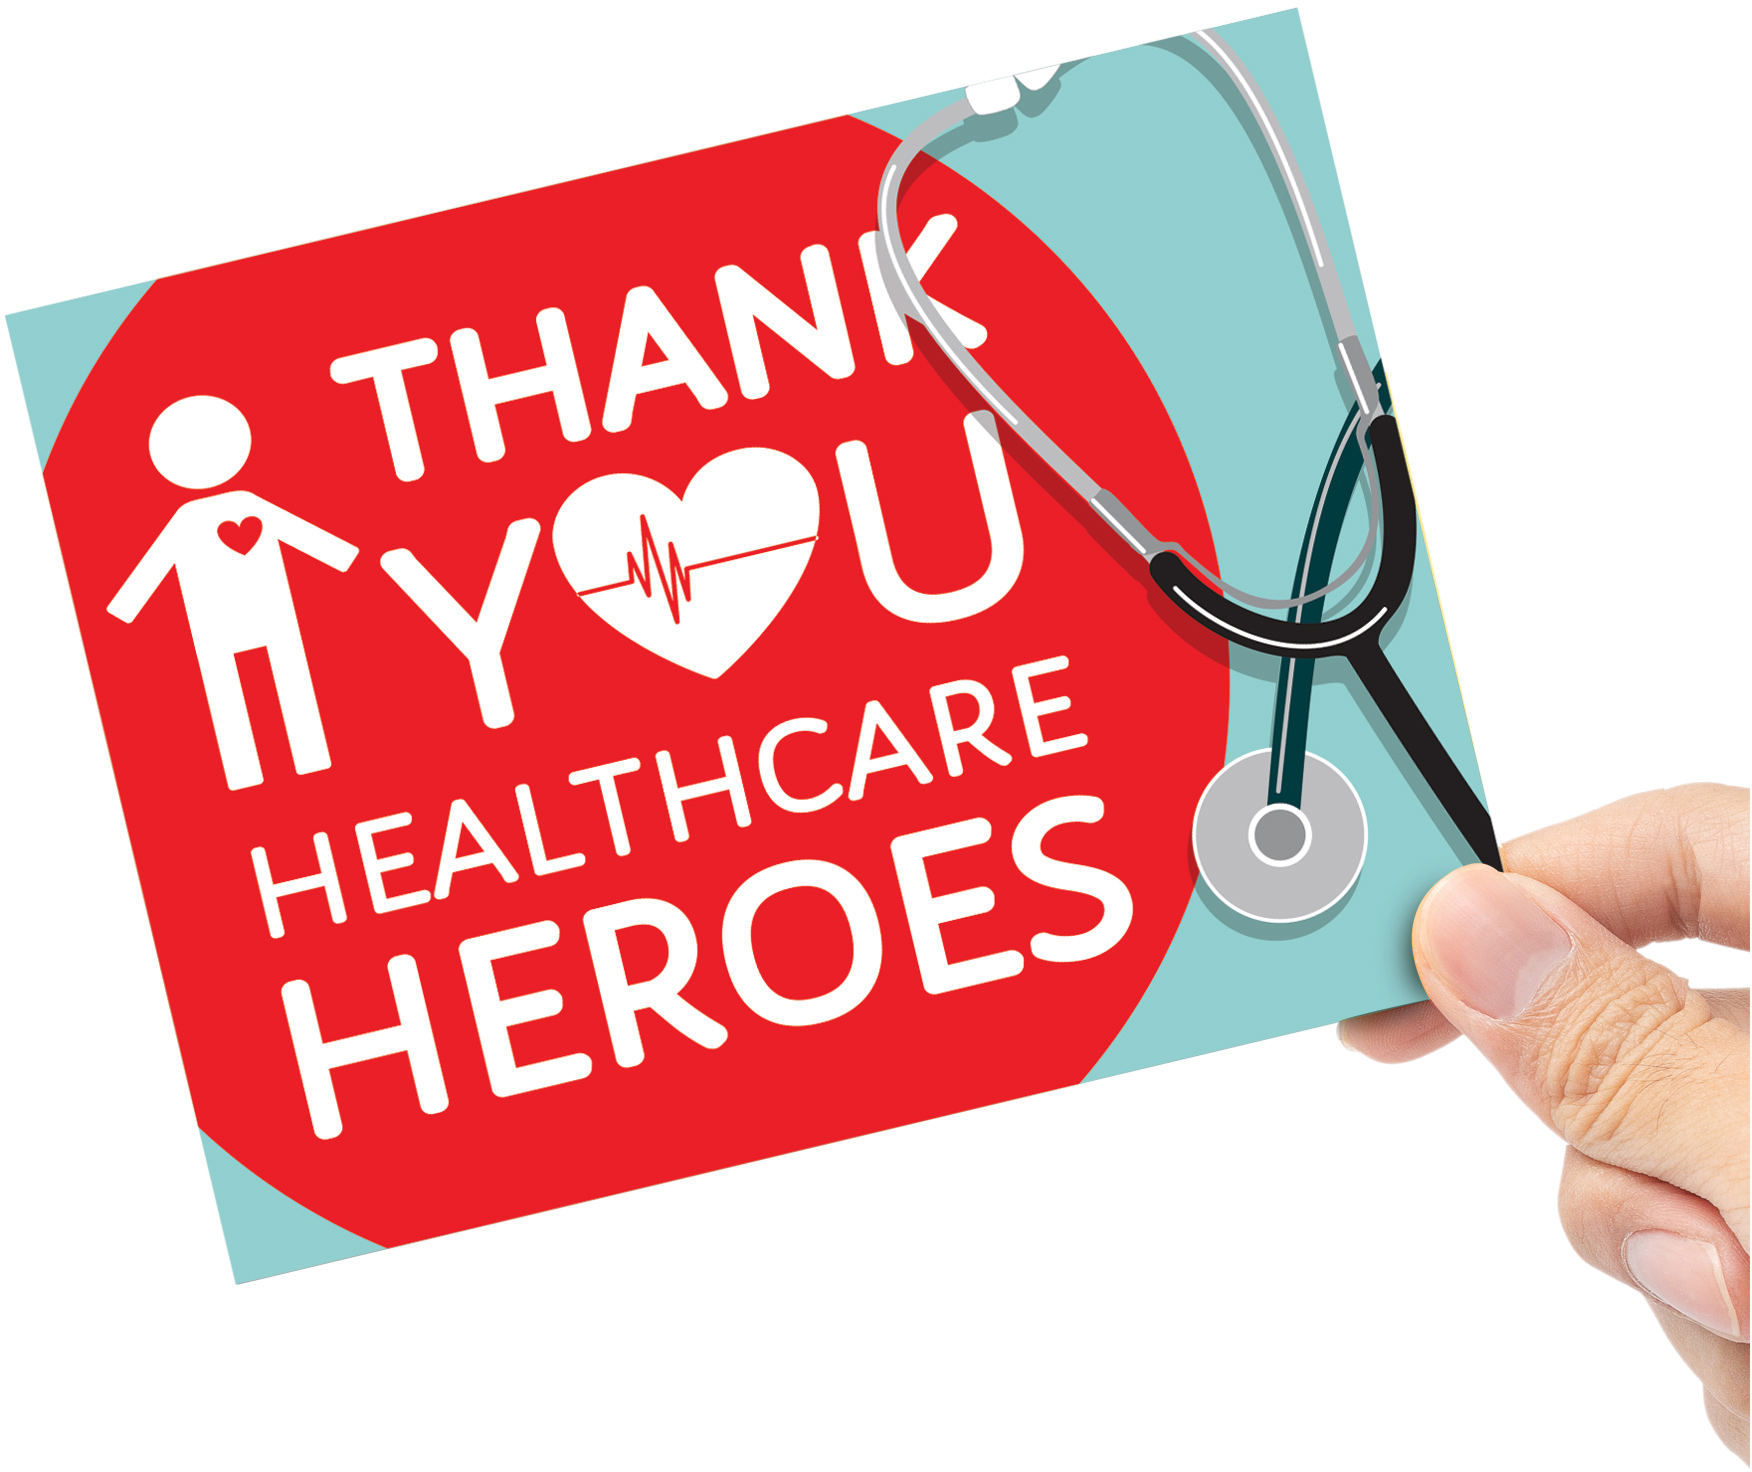 Thank You Healthcare Heroes Vinyl Sticker - 6 x 4.5 inch